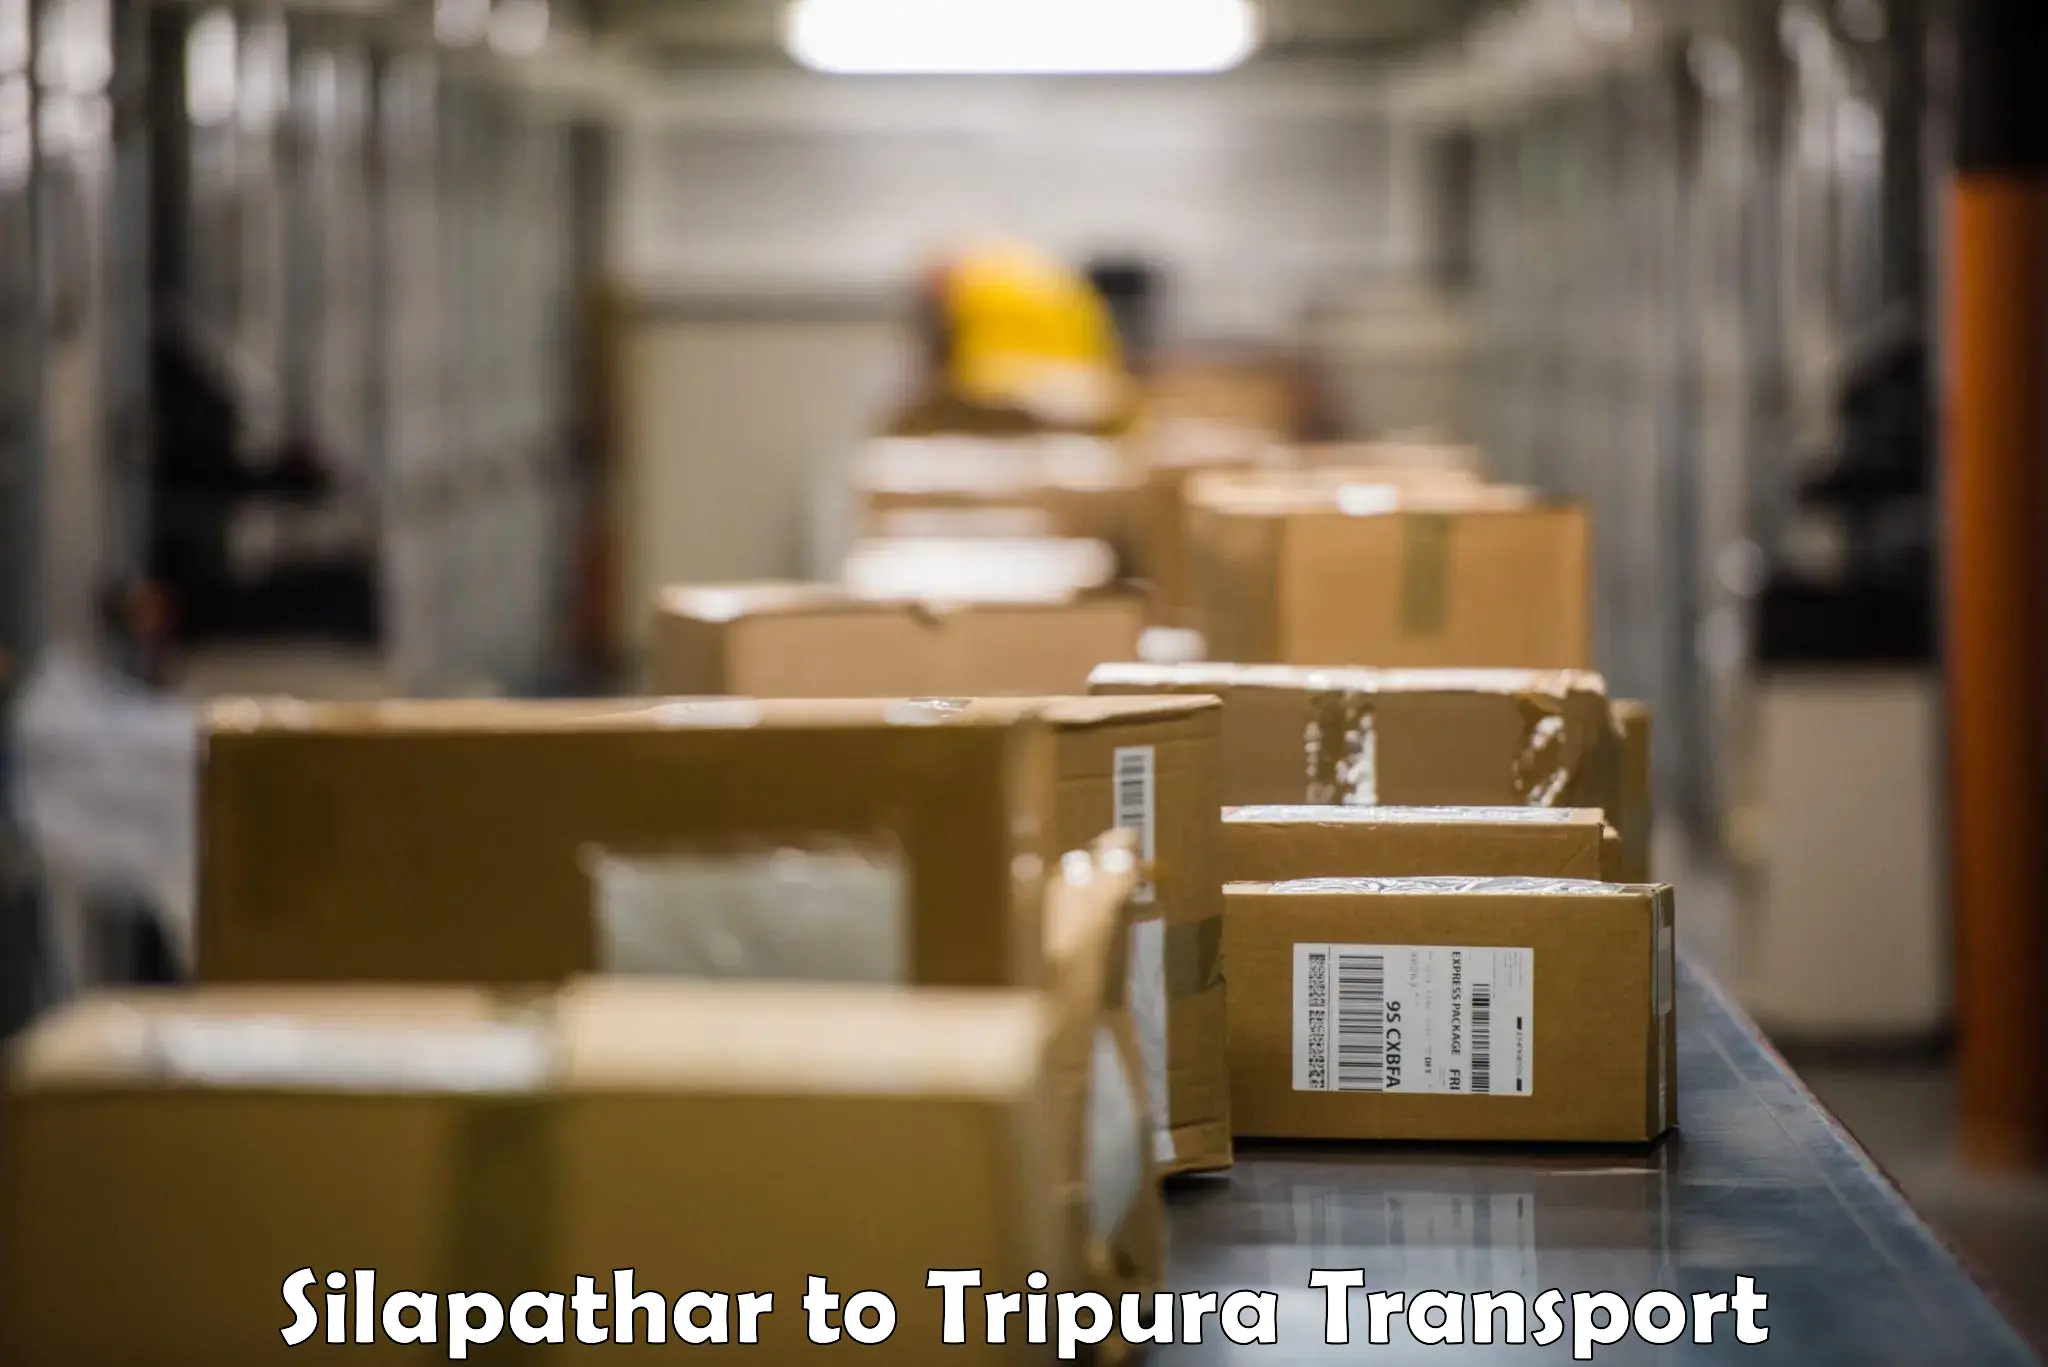 Lorry transport service Silapathar to Udaipur Tripura